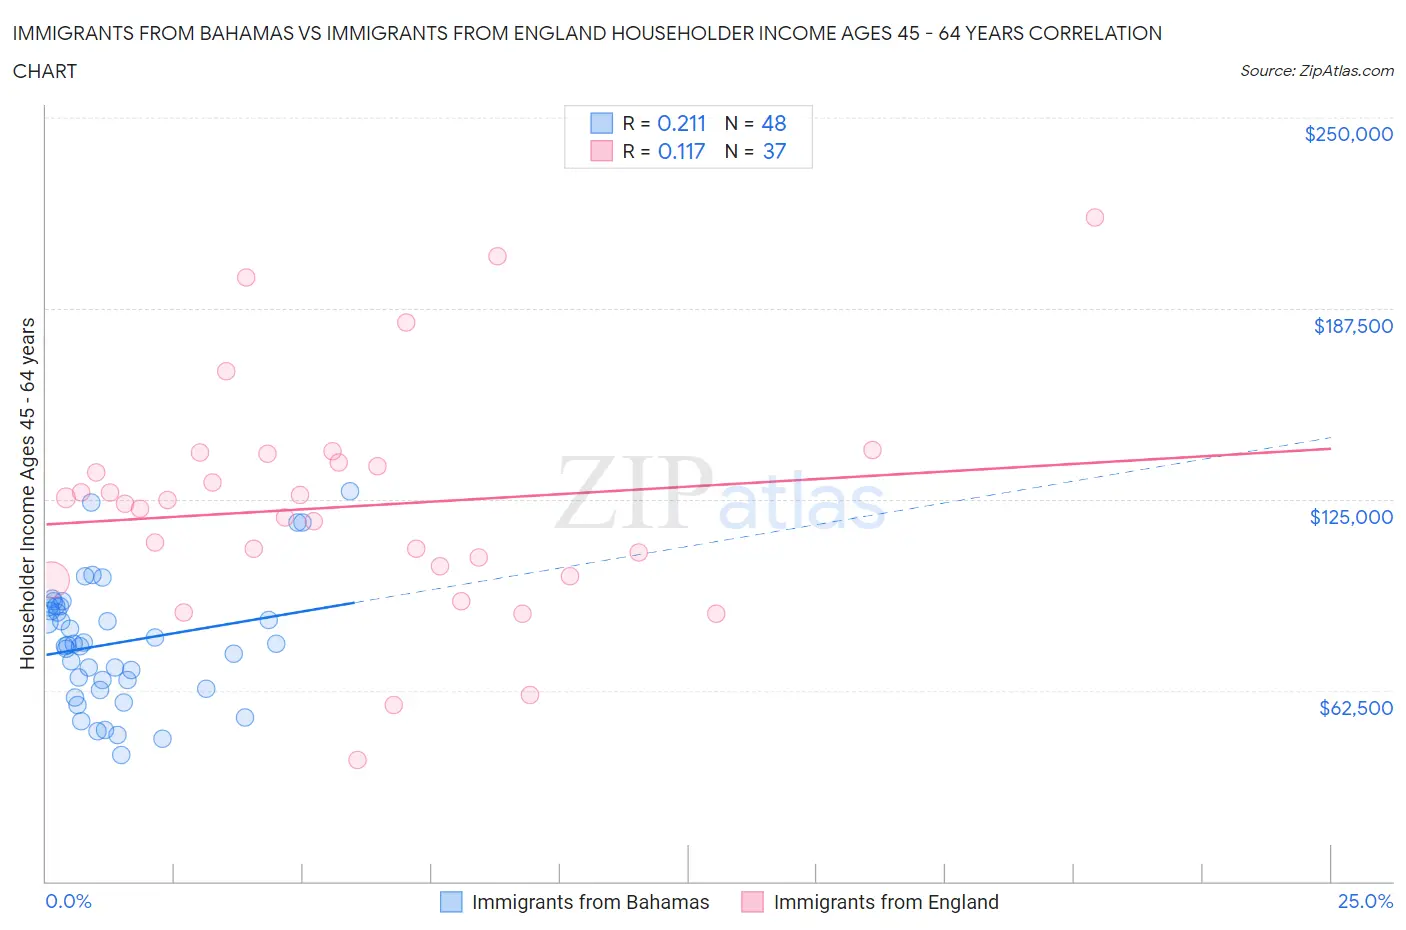 Immigrants from Bahamas vs Immigrants from England Householder Income Ages 45 - 64 years